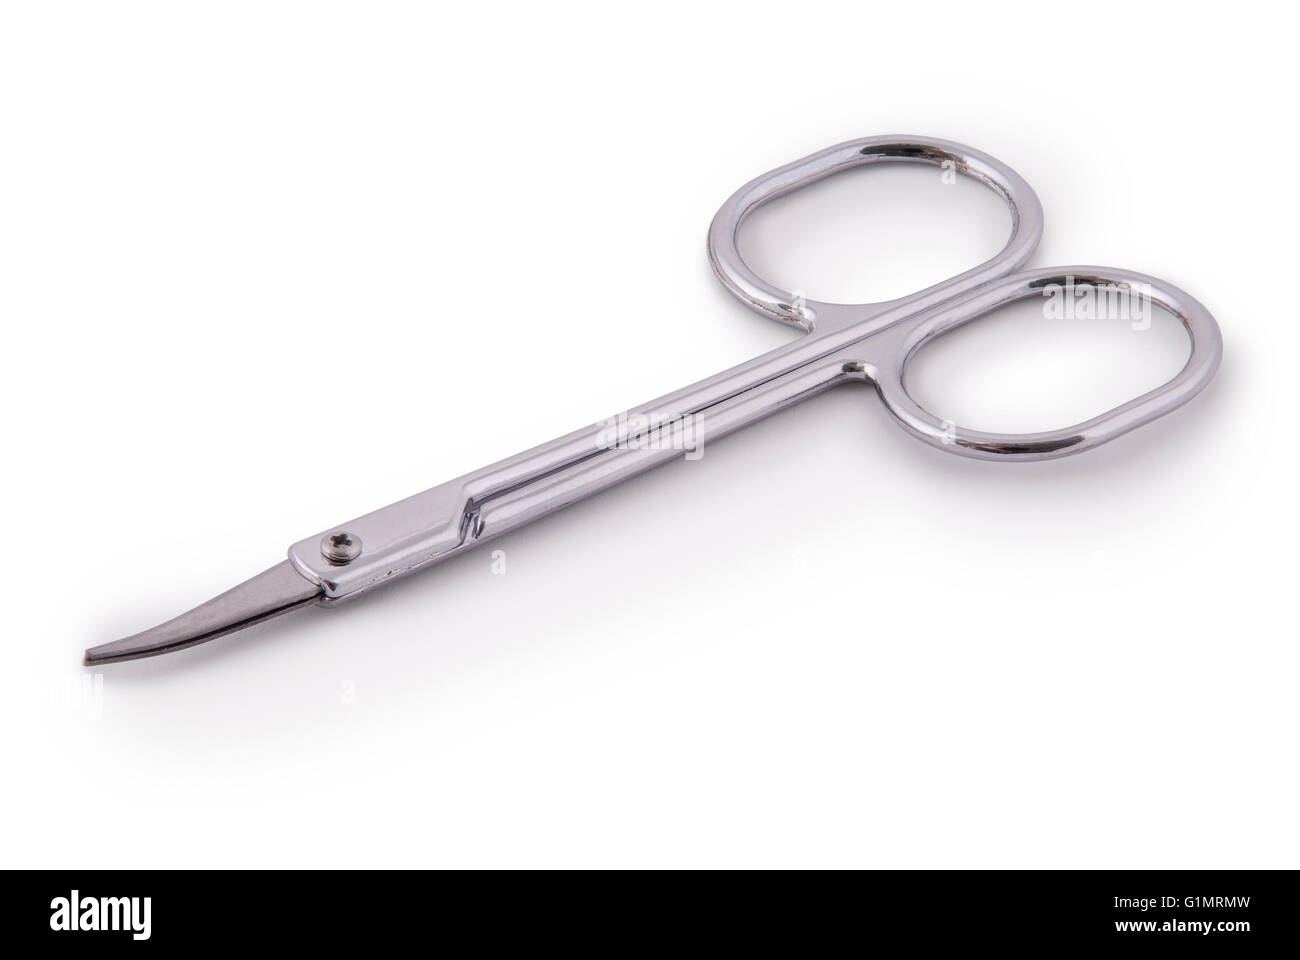 Small steel manicure scissors isolated on white with clipping path Stock Photo